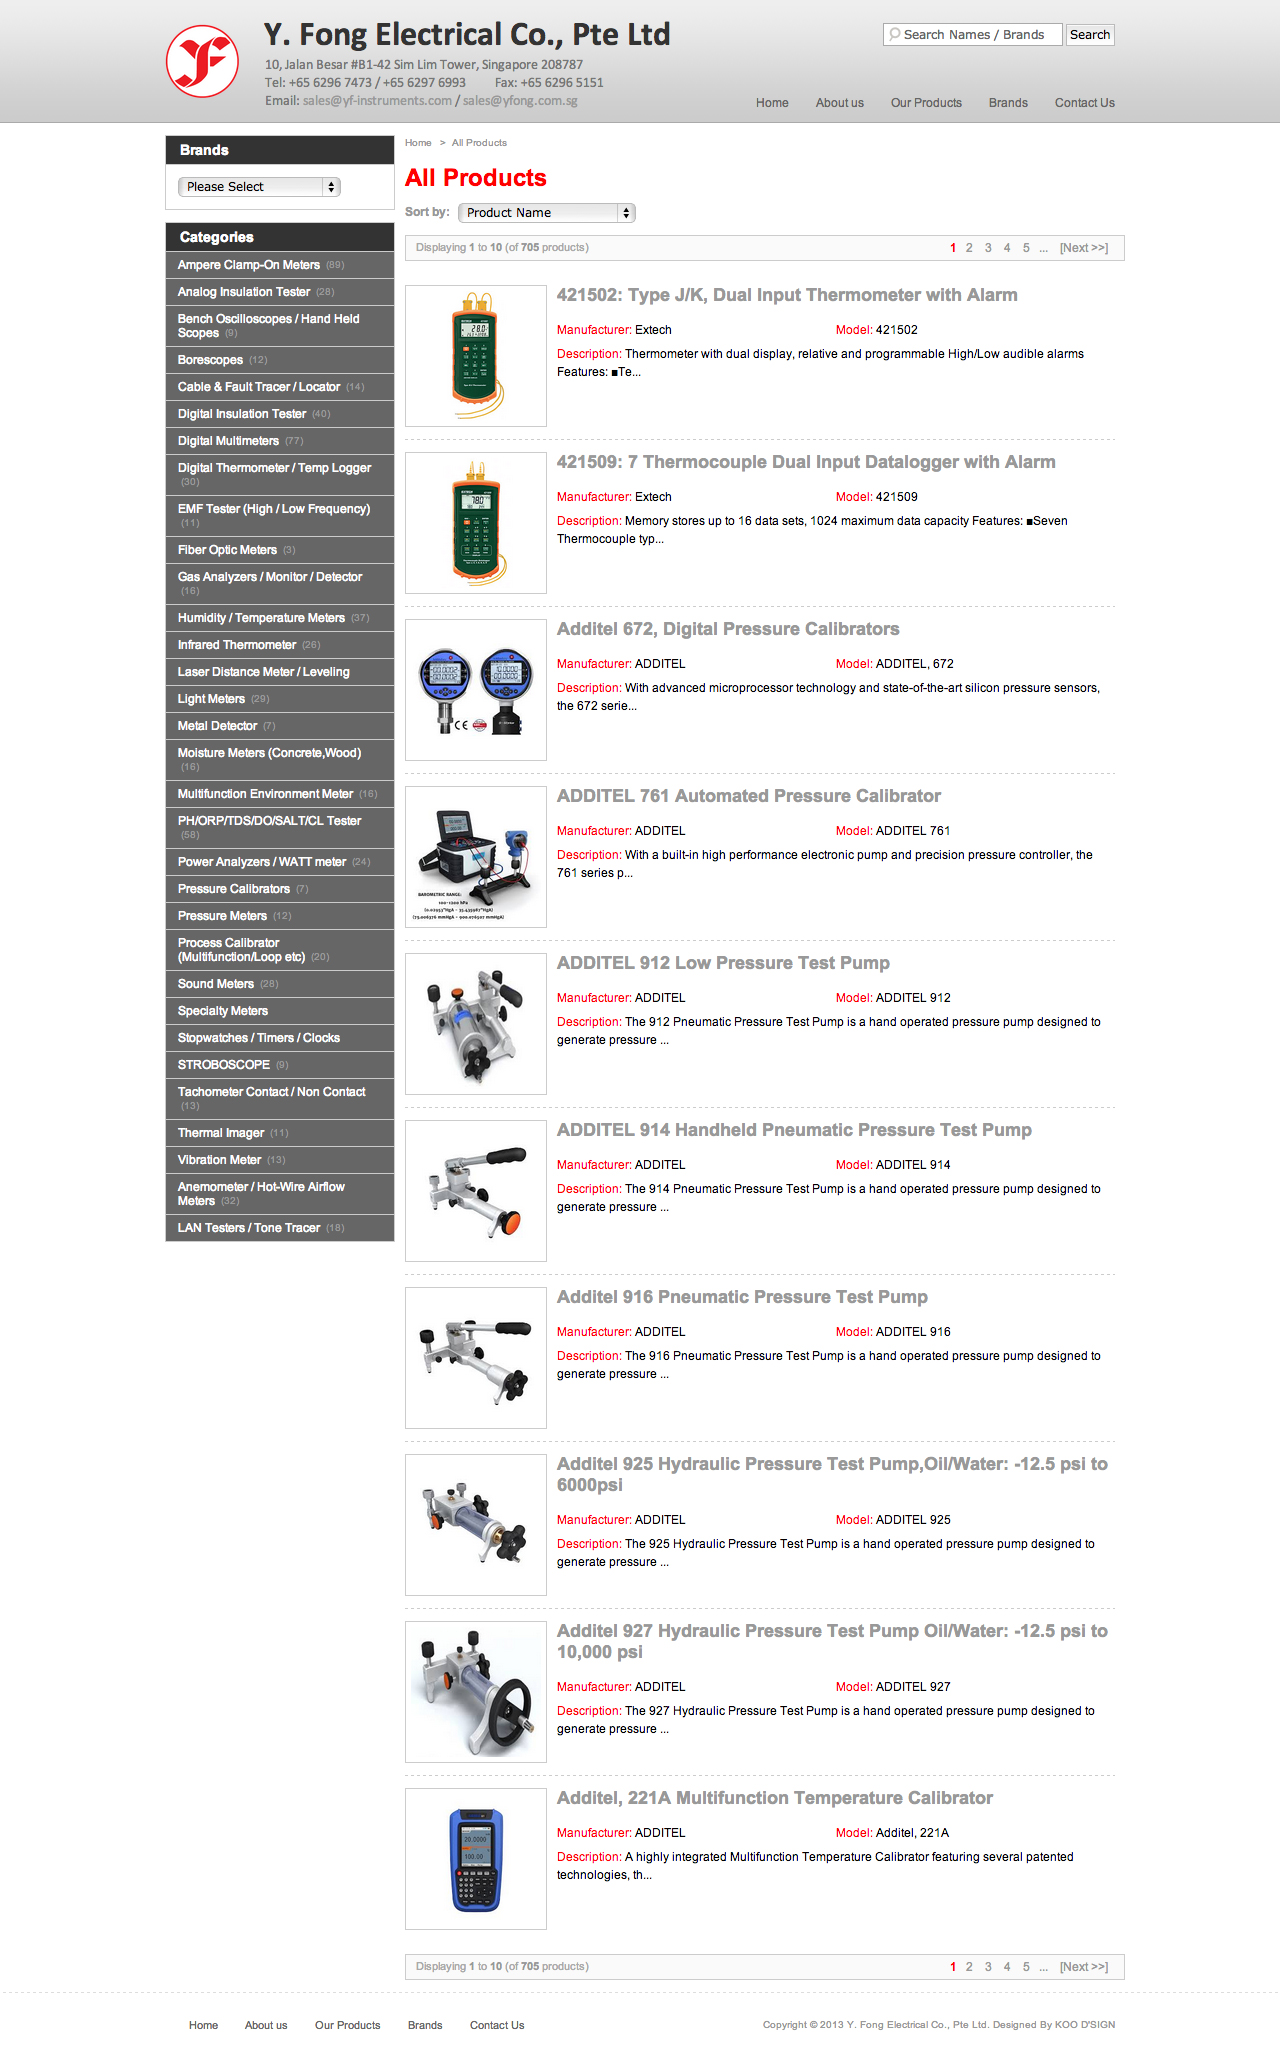 Y Fong Electrical Co Pte Ltd 2012 website products